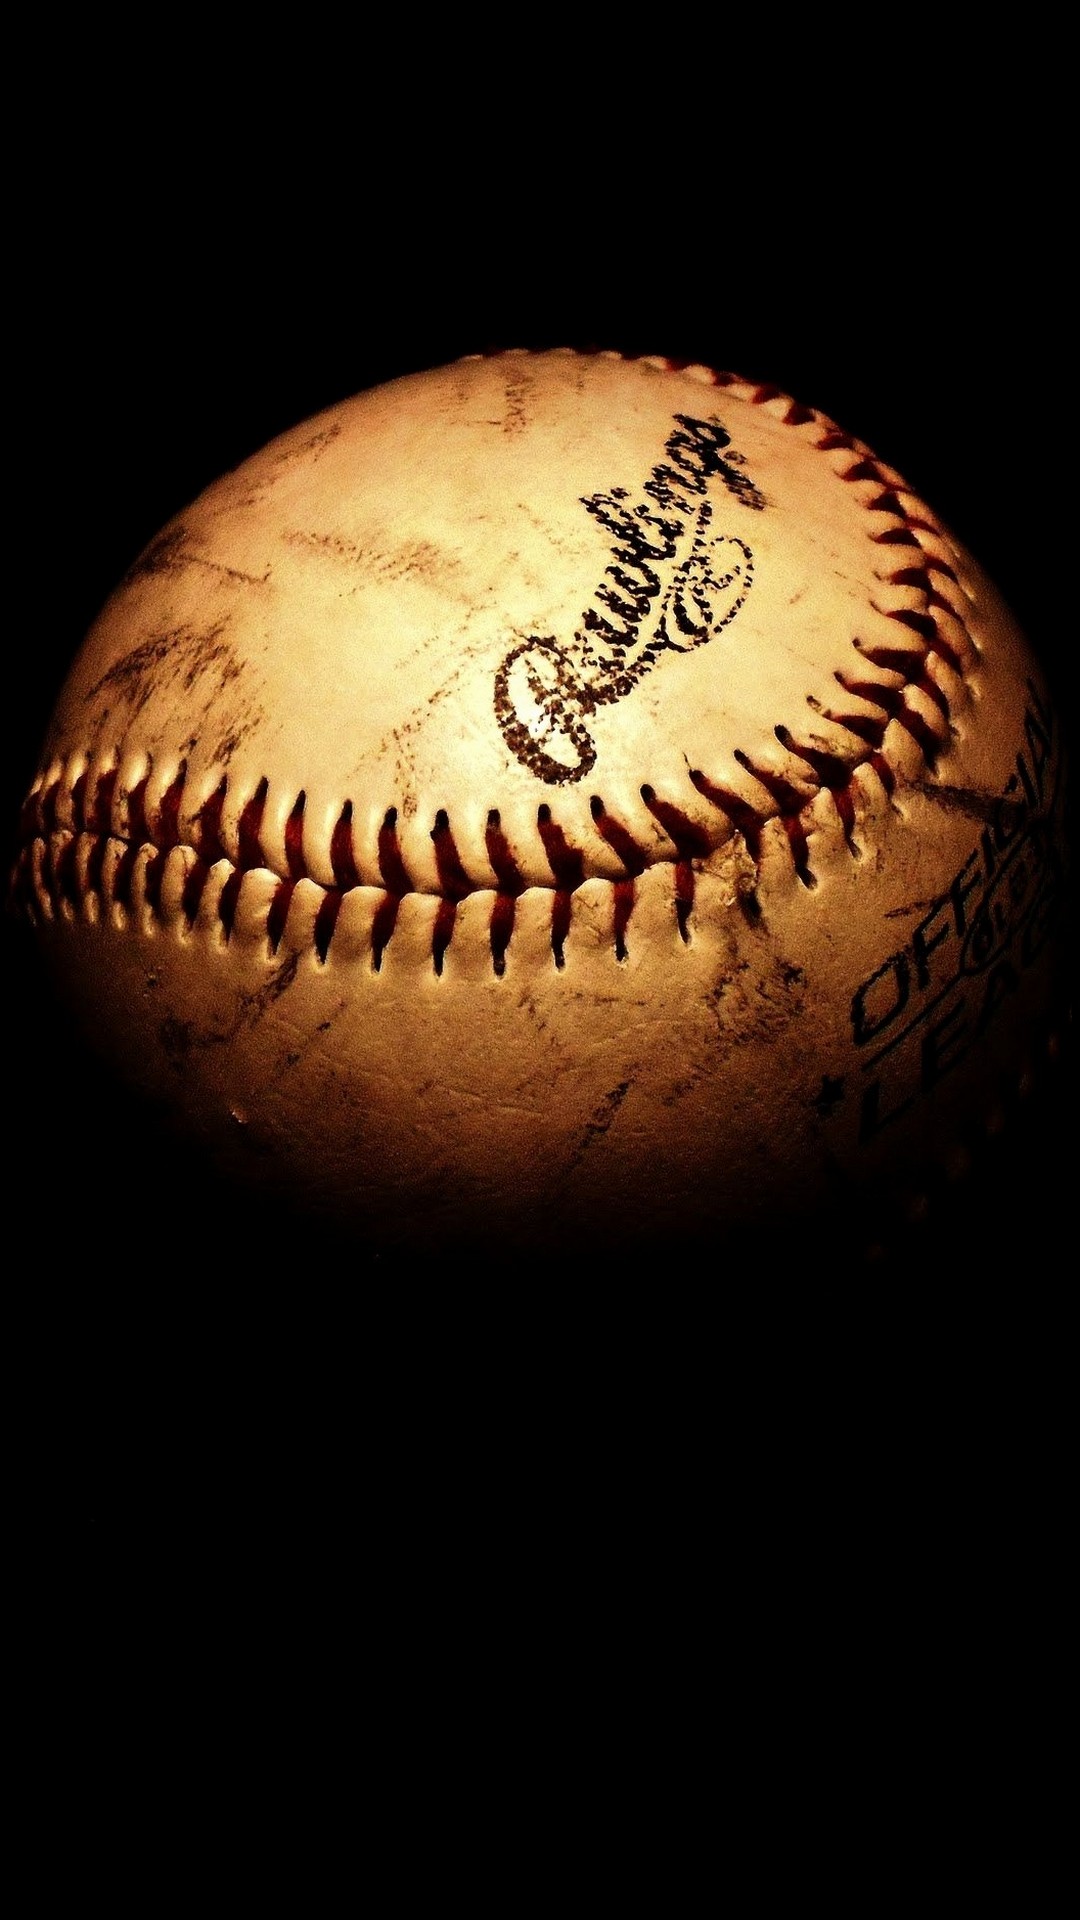 Cool Baseball iPhone Wallpapers With high-resolution 1080X1920 pixel. You can use this wallpaper for Mac Desktop Wallpaper, Laptop Screensavers, Android Wallpapers, Tablet or iPhone Home Screen and another mobile phone device